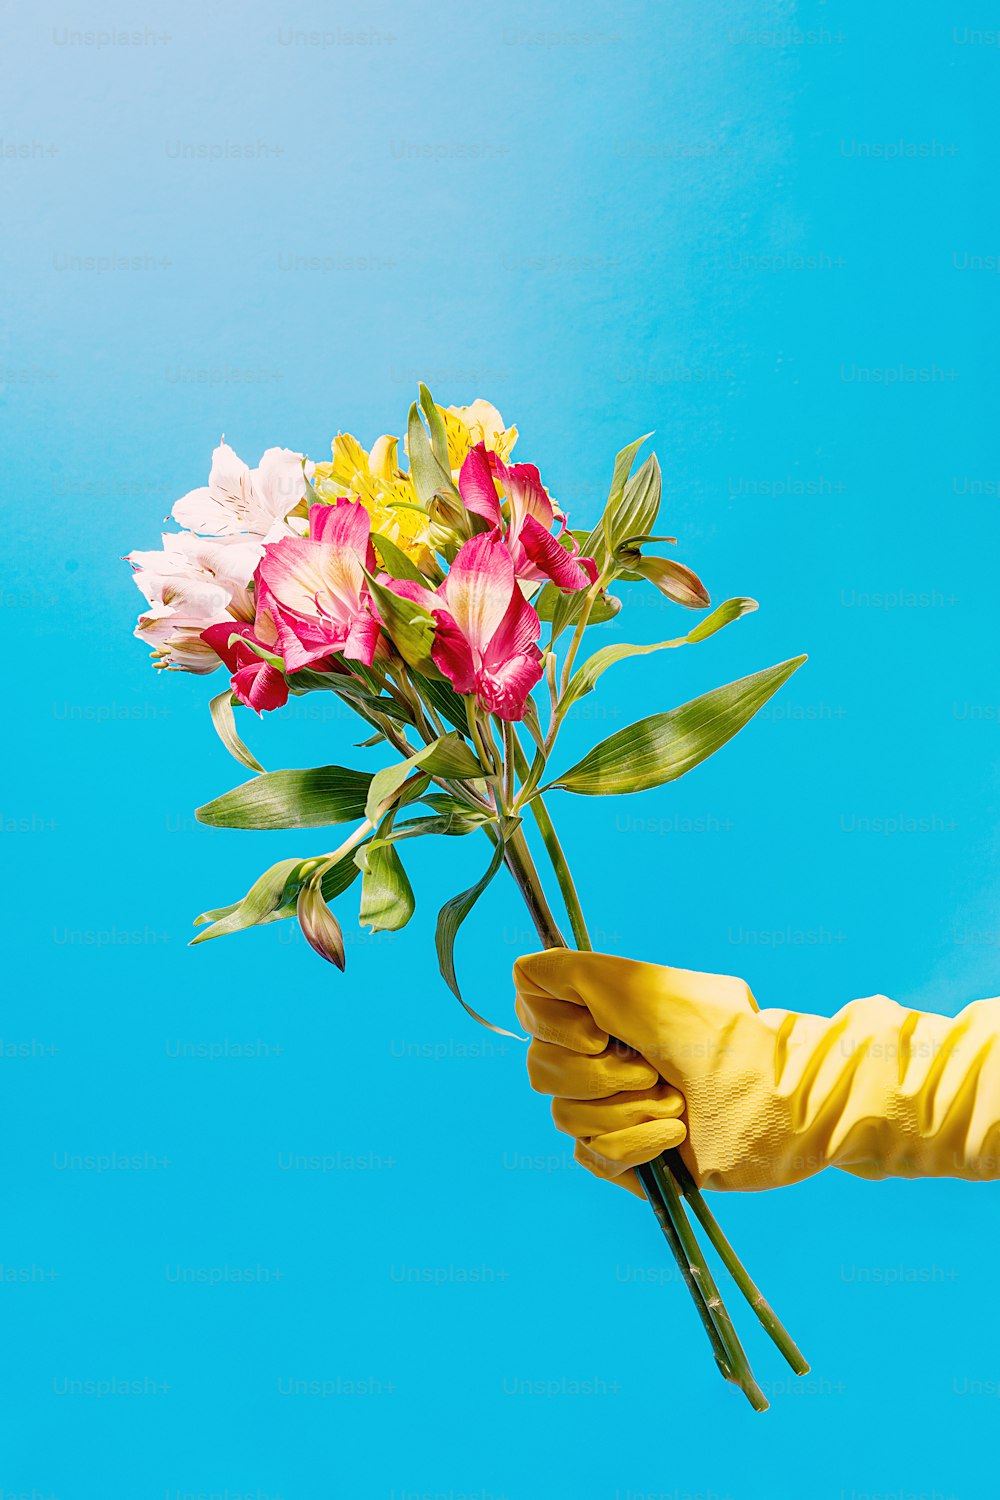 a person in yellow rubber gloves holding a bouquet of flowers